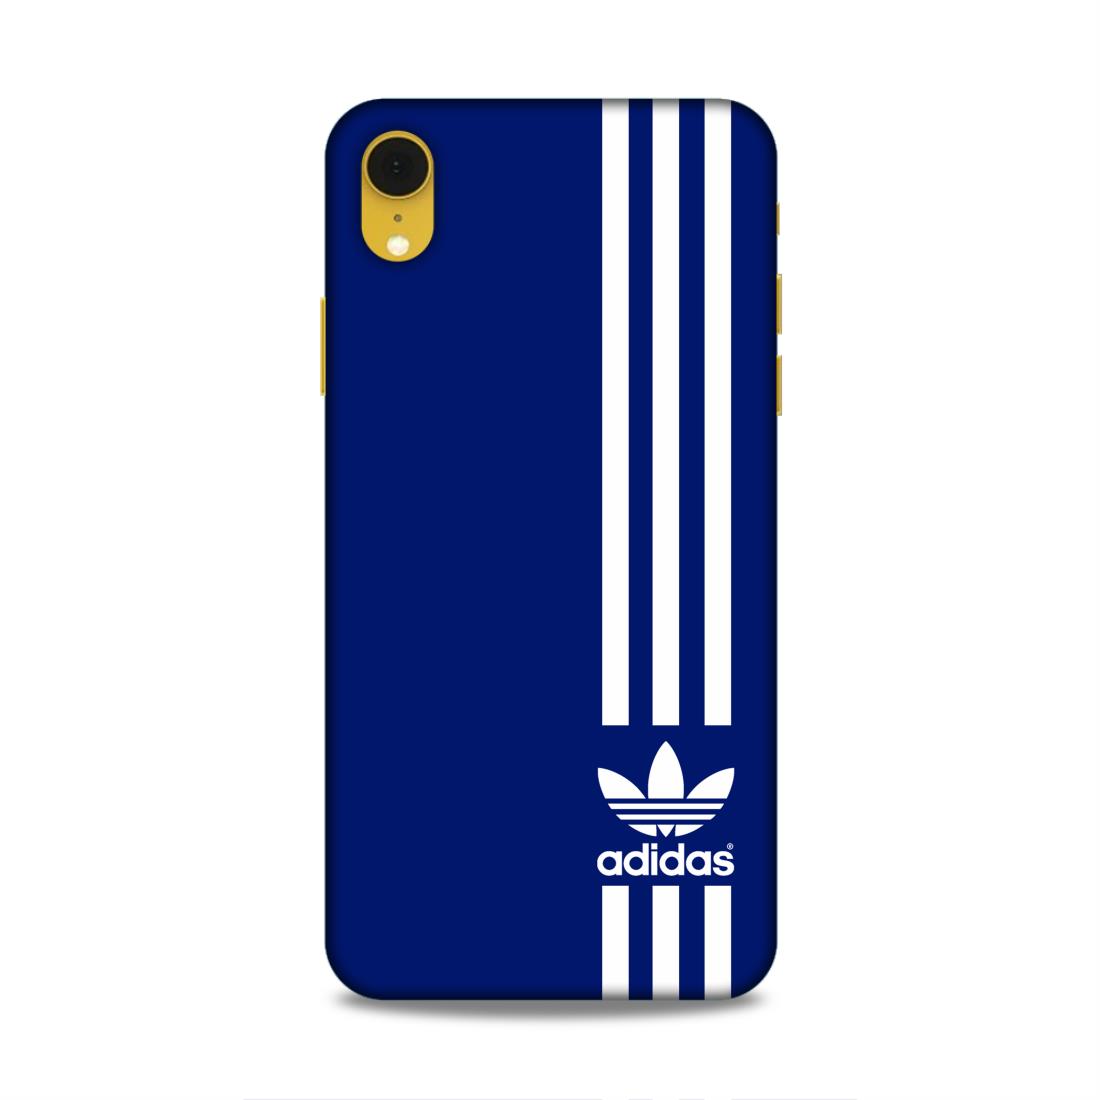 Adidas in Blue Hard Back Case For Apple iPhone XR